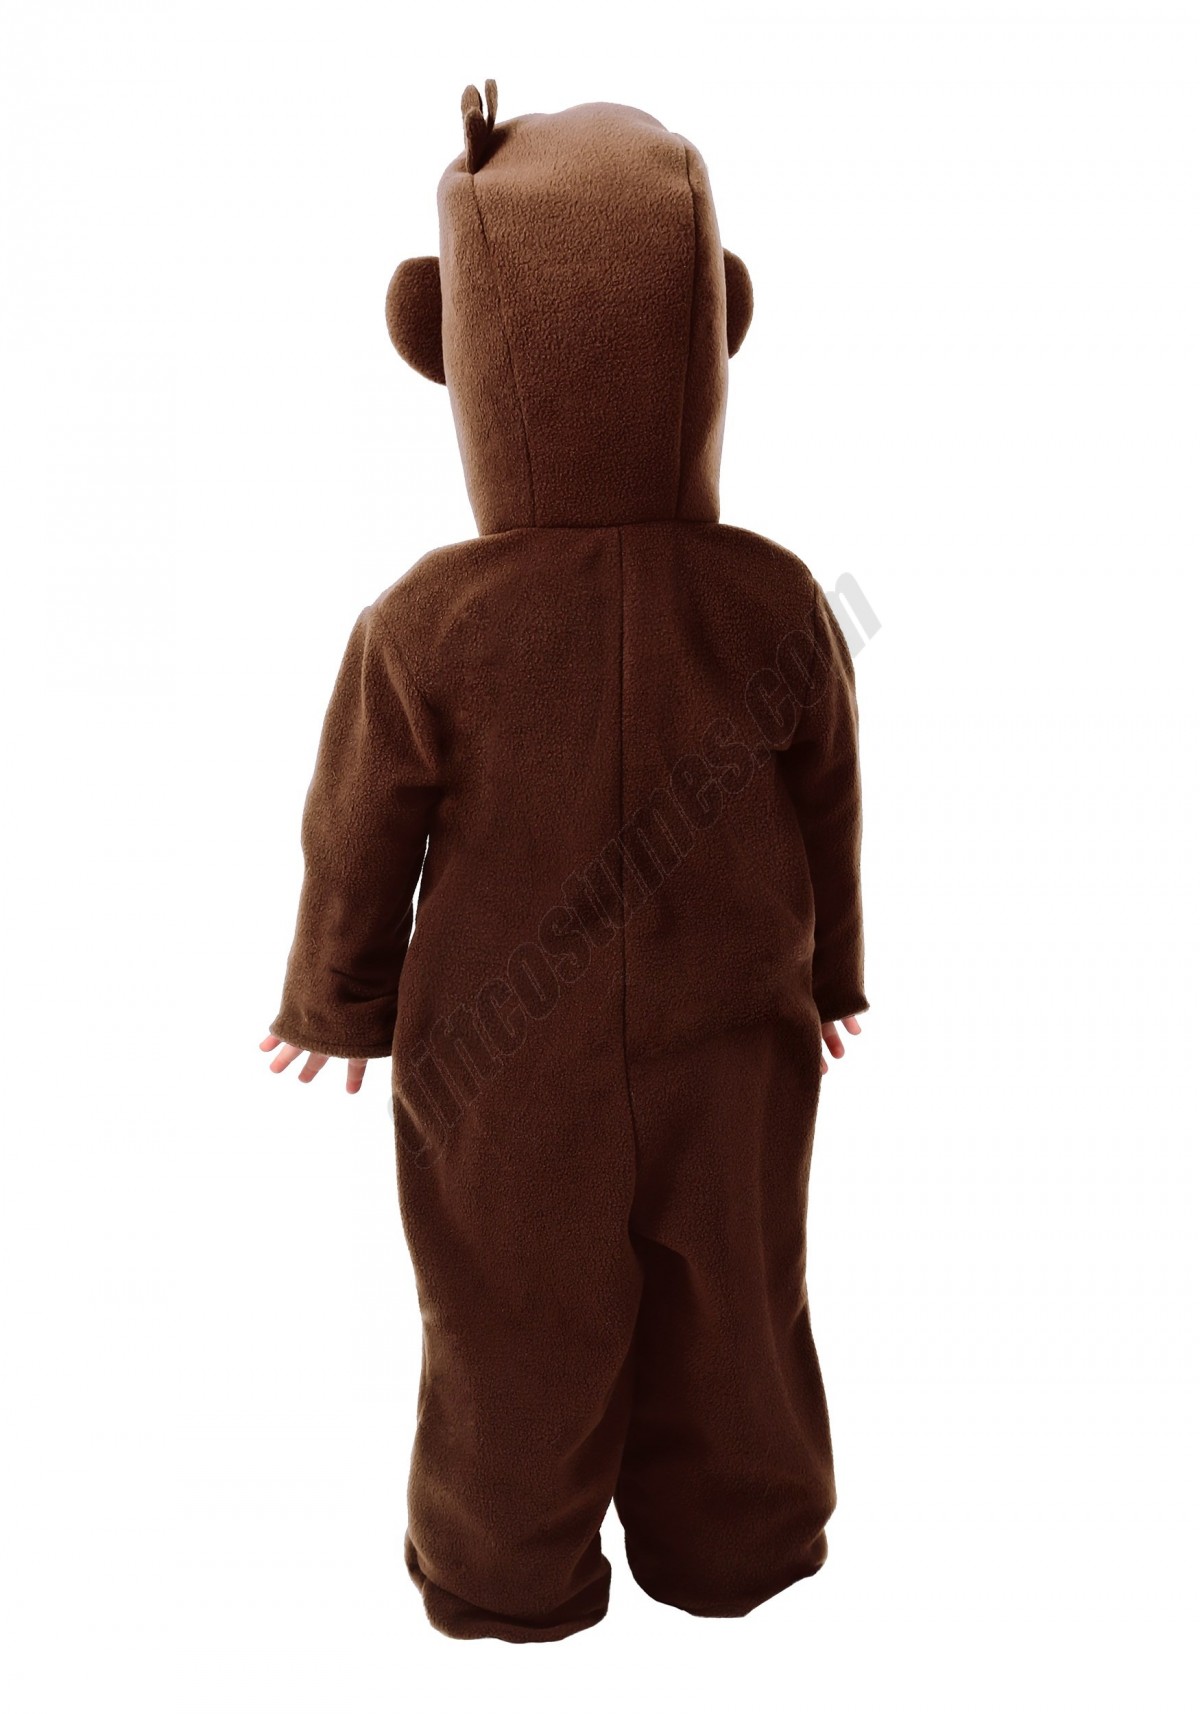 Deluxe Curious George Toddler Costume Promotions - -1